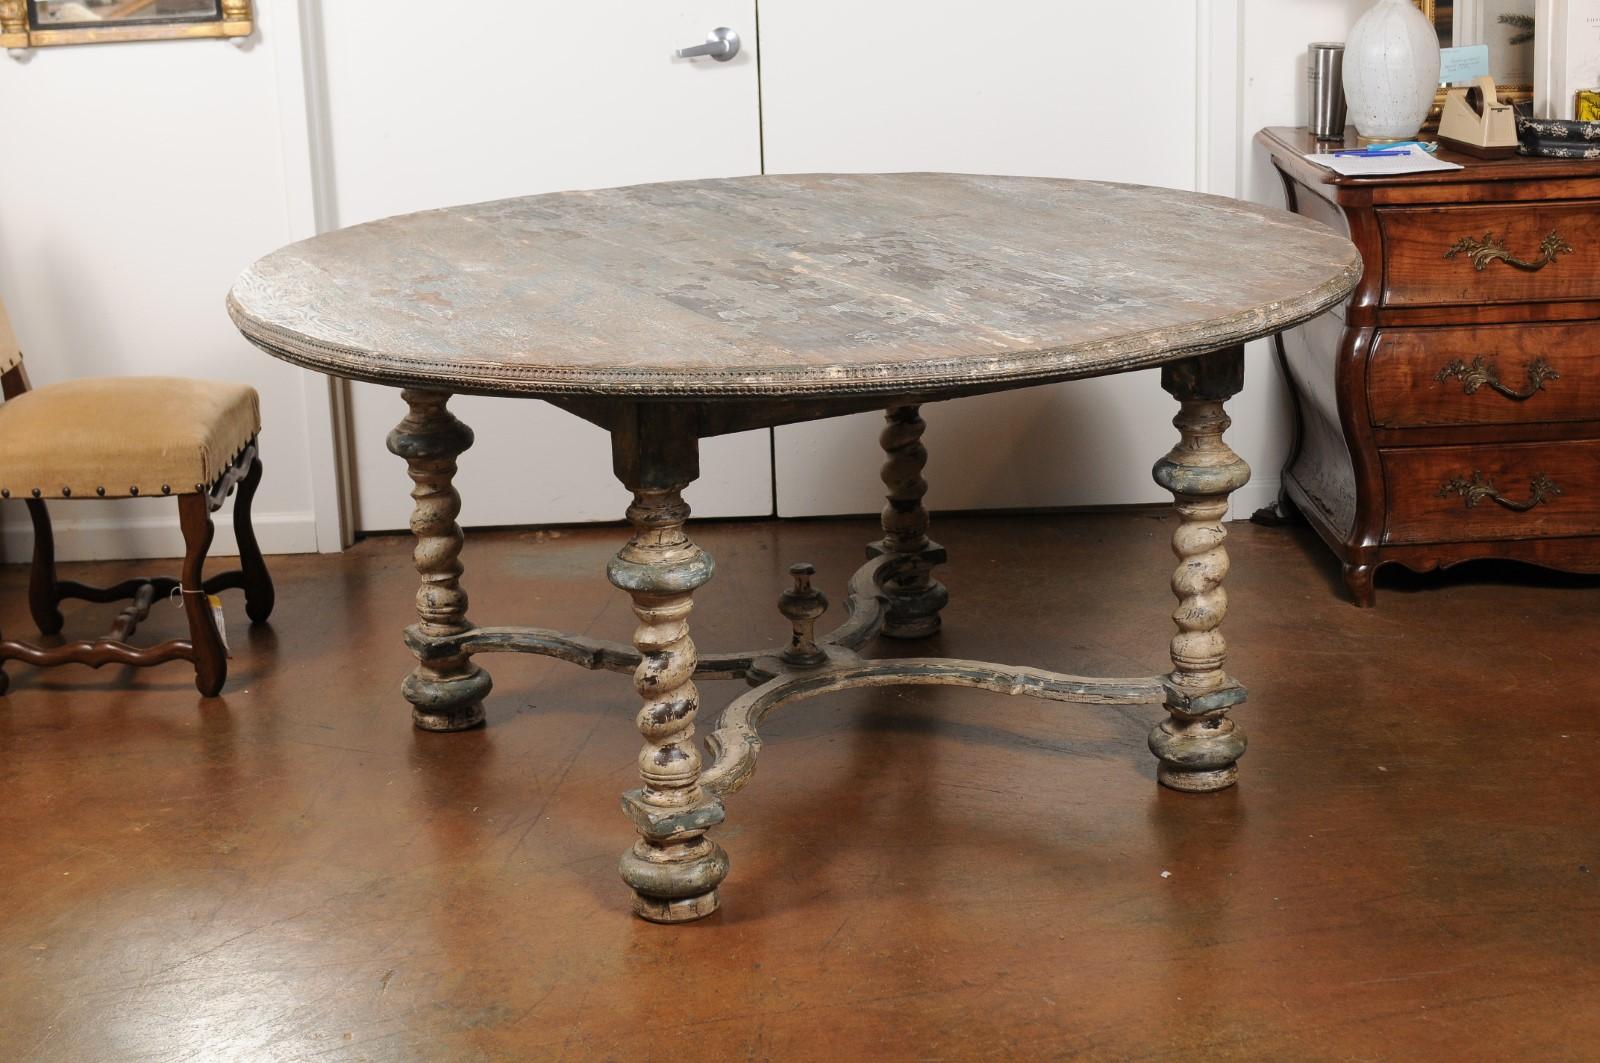 An Italian Baroque style painted dining table from the 19th century, with carved trim and barley twist base. This exquisite painted, 19th century dining table features a circular scraped top, adorned with a delicately carved trim. The table is